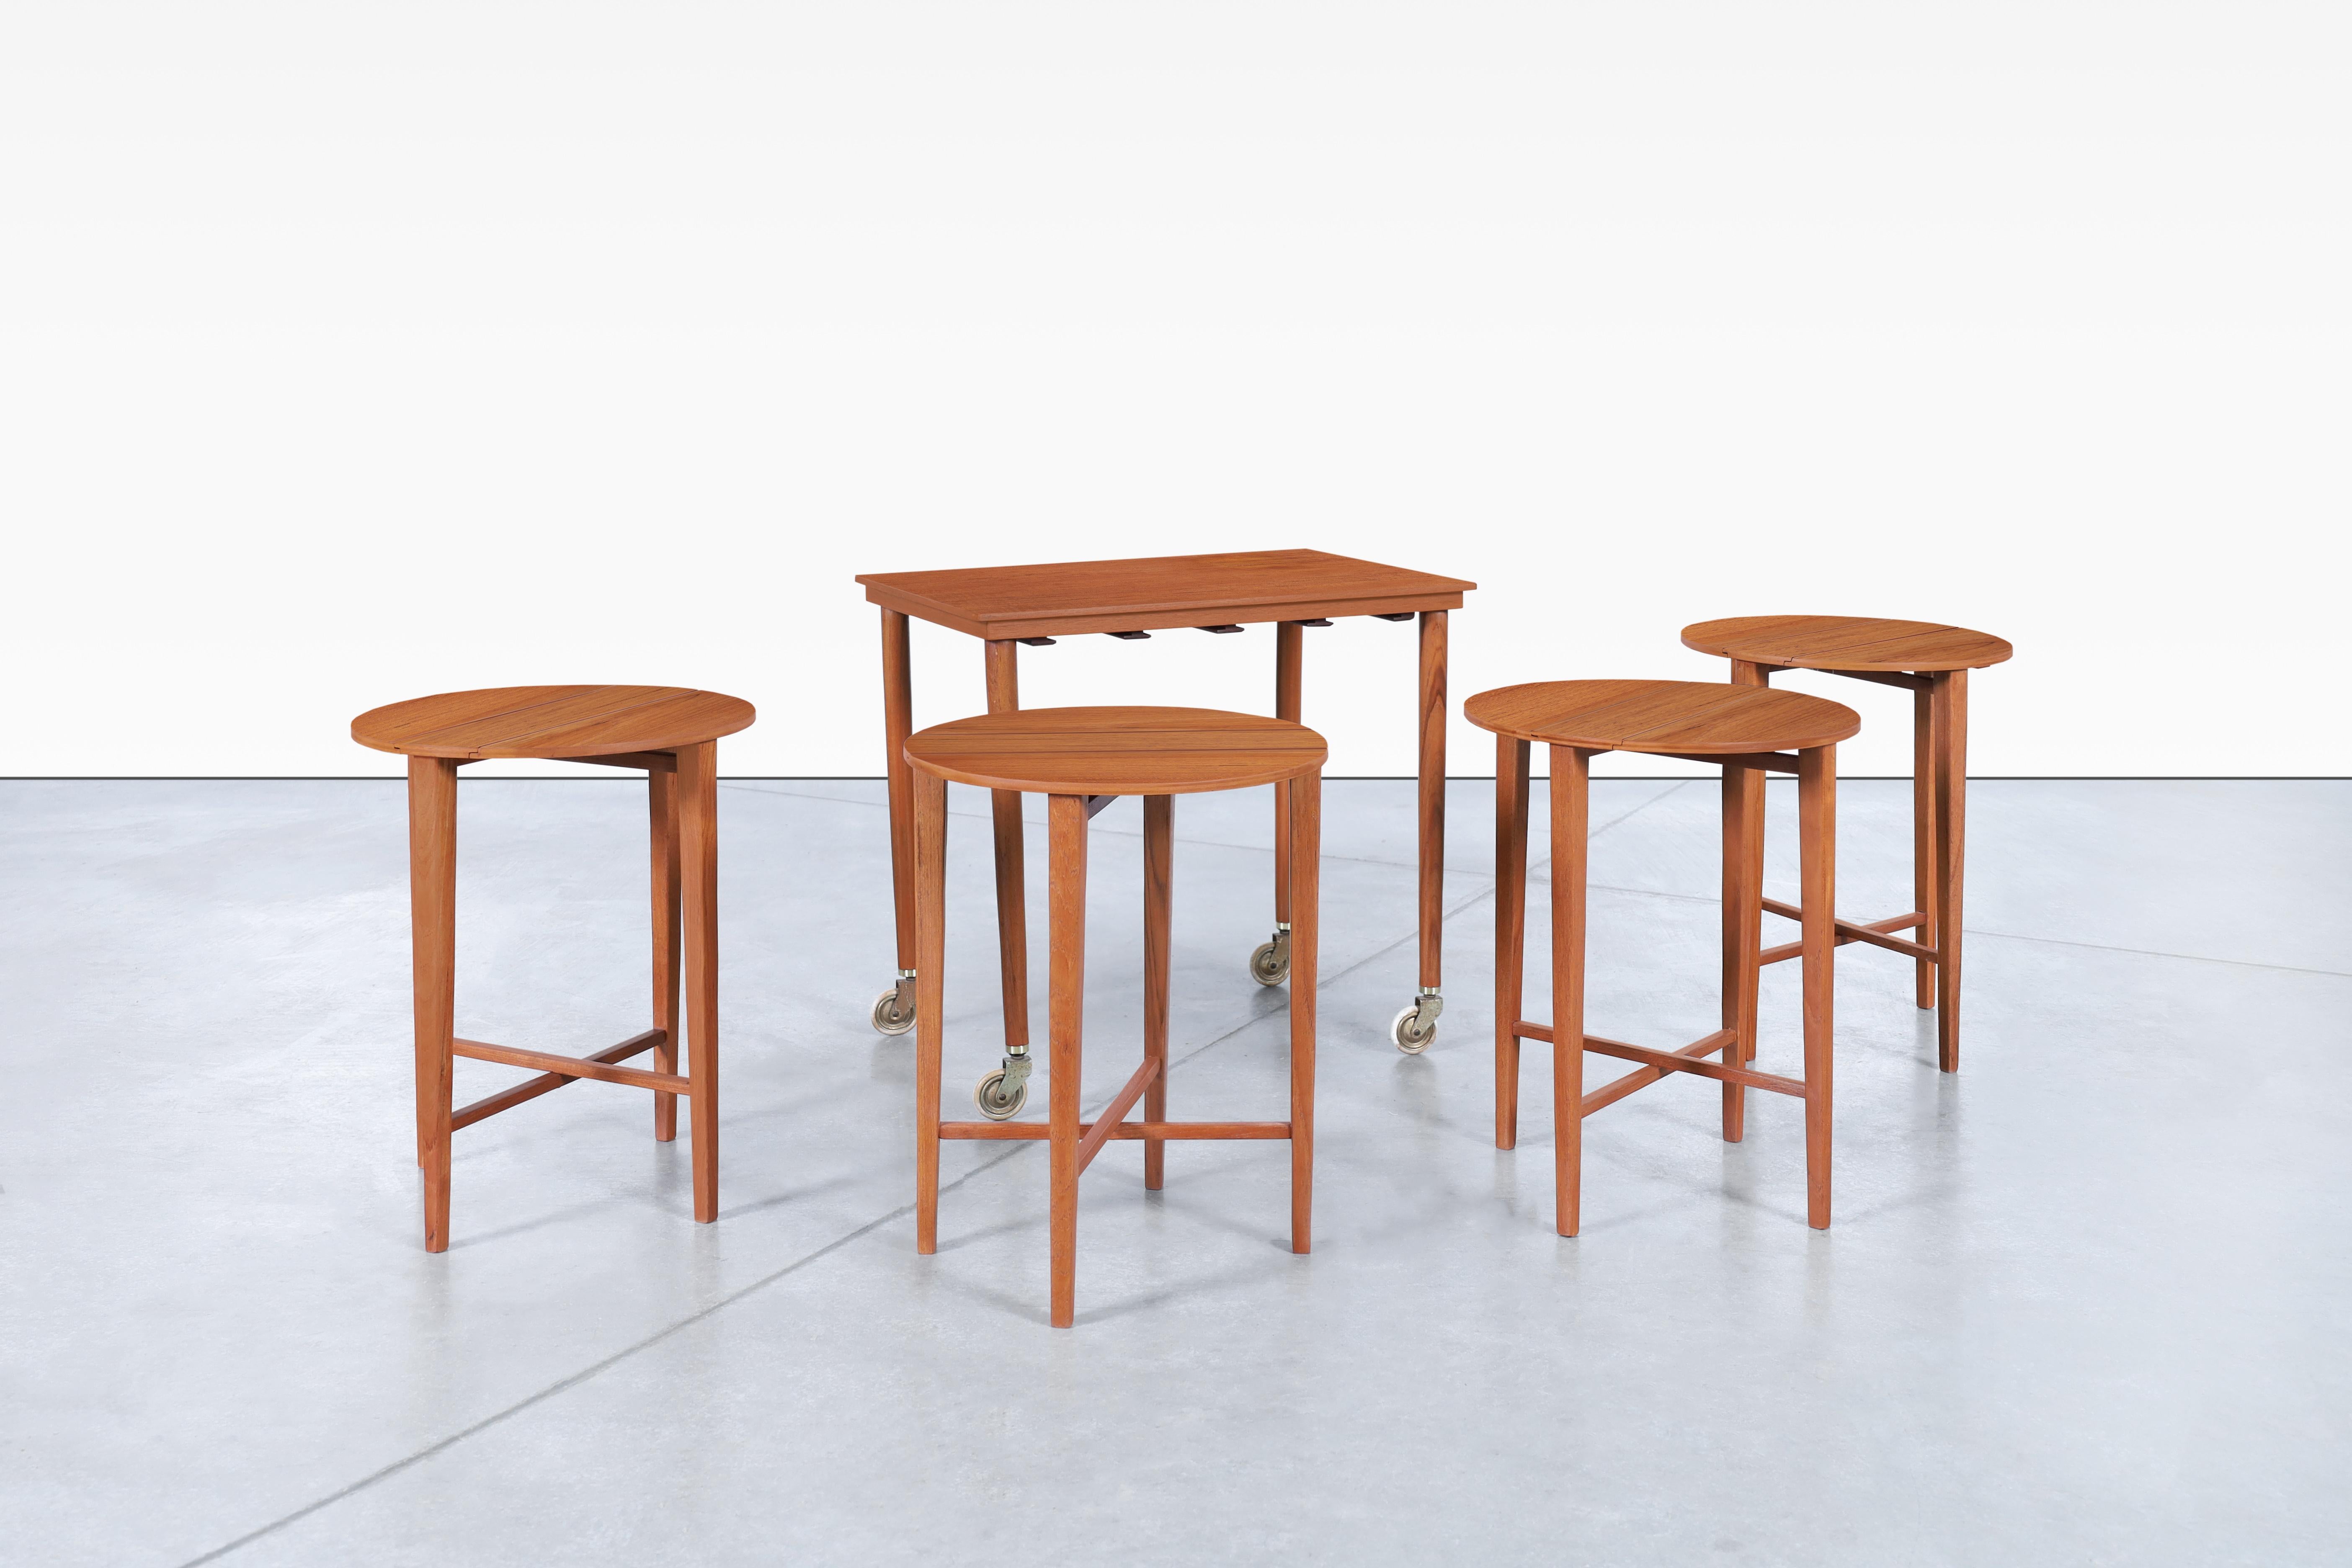 Beautiful Danish modern teak nesting table designed by Carlo Jensen for Poul Hundevad in Denmark, circa 1960s. Handcrafted with a teak top, beech legs and metal accents, this refinished piece is a testament to the art of thoughtful furniture. Four